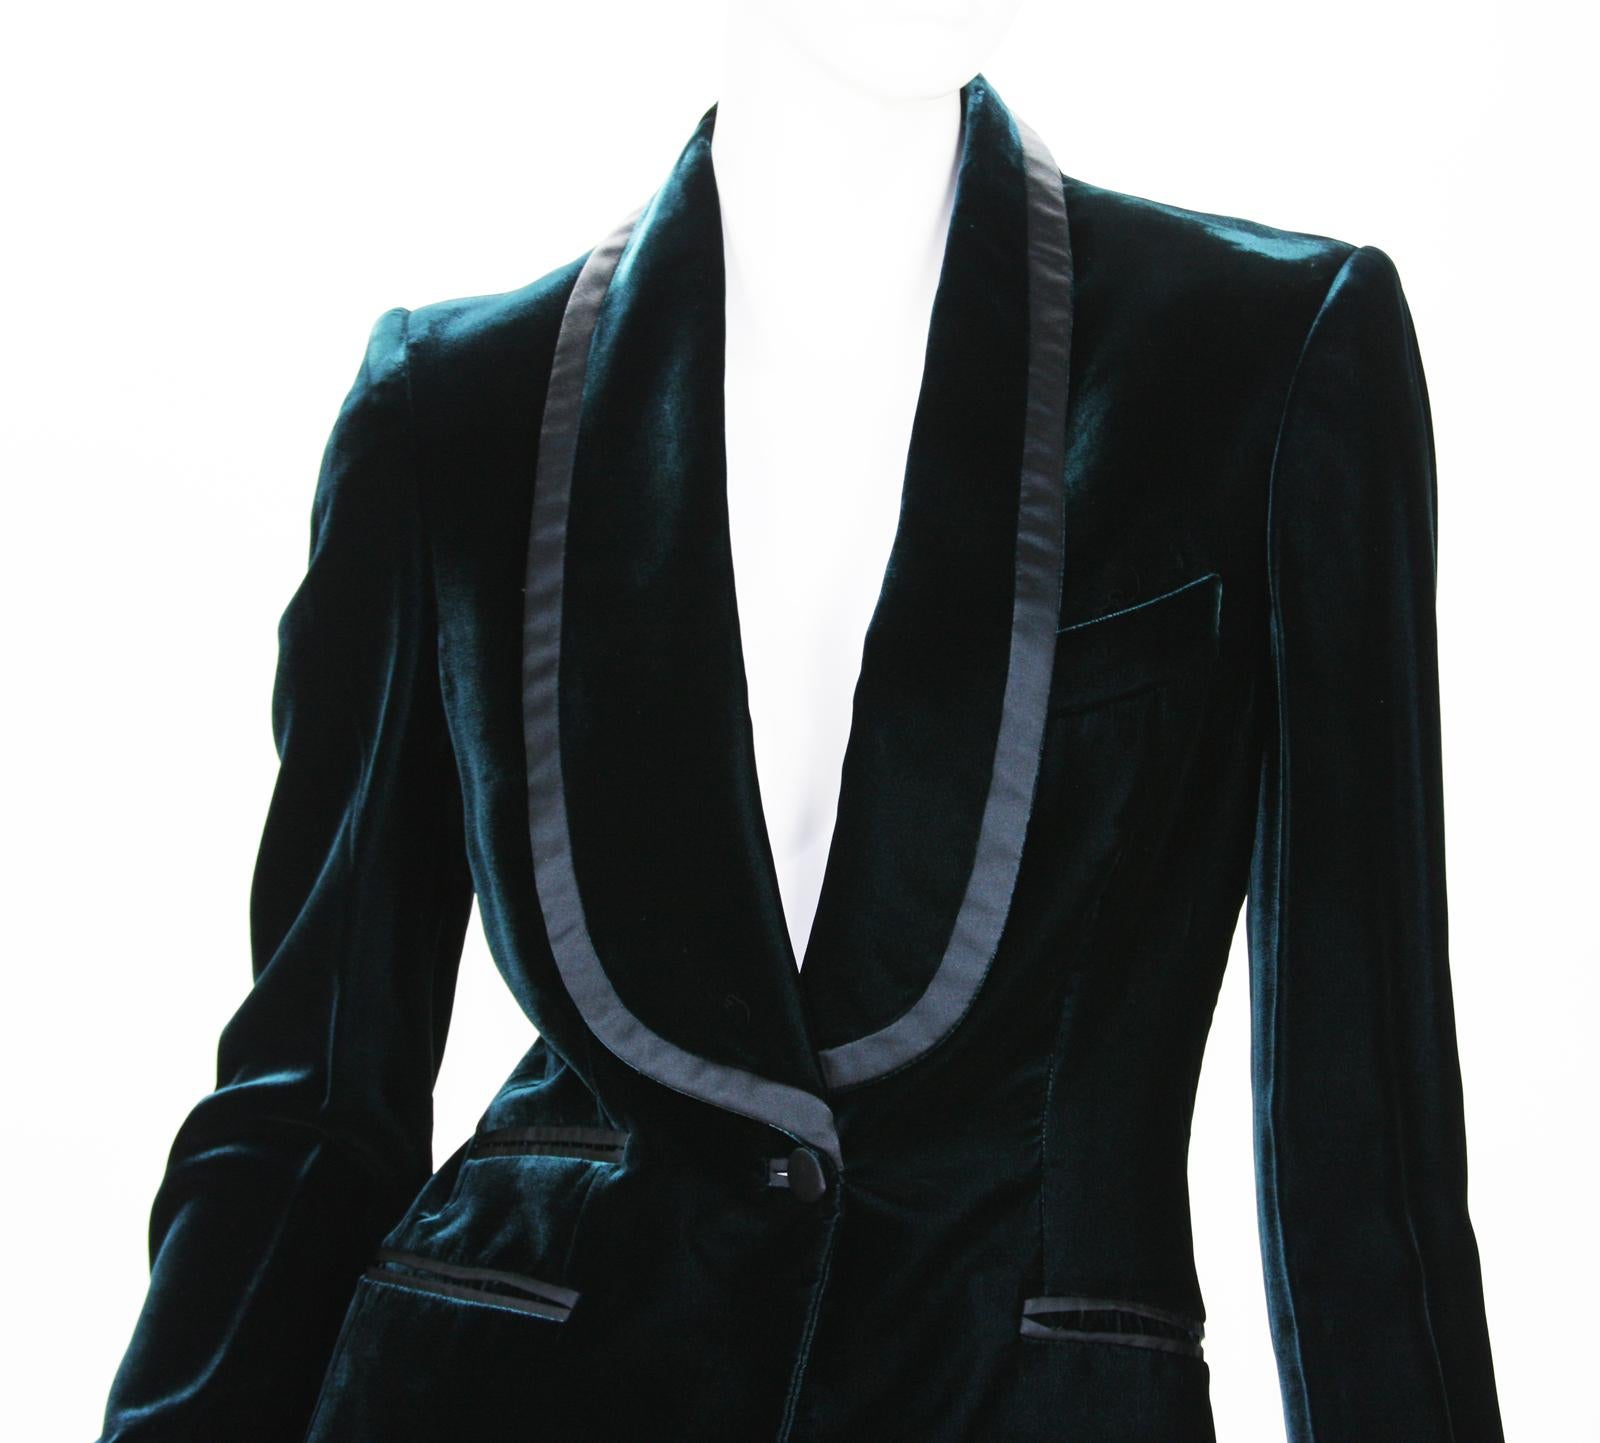 Tom Ford for Gucci Velvet Emerald Green Tuxedo Jacket
F/W 2004 Final Tom Ford Runway Collection for Gucci
Designer sizes available 38 and 40
Emerald Green Color, Shawl Collar, Black Satin Trim, Single Button Closure, Fully Lined, 4